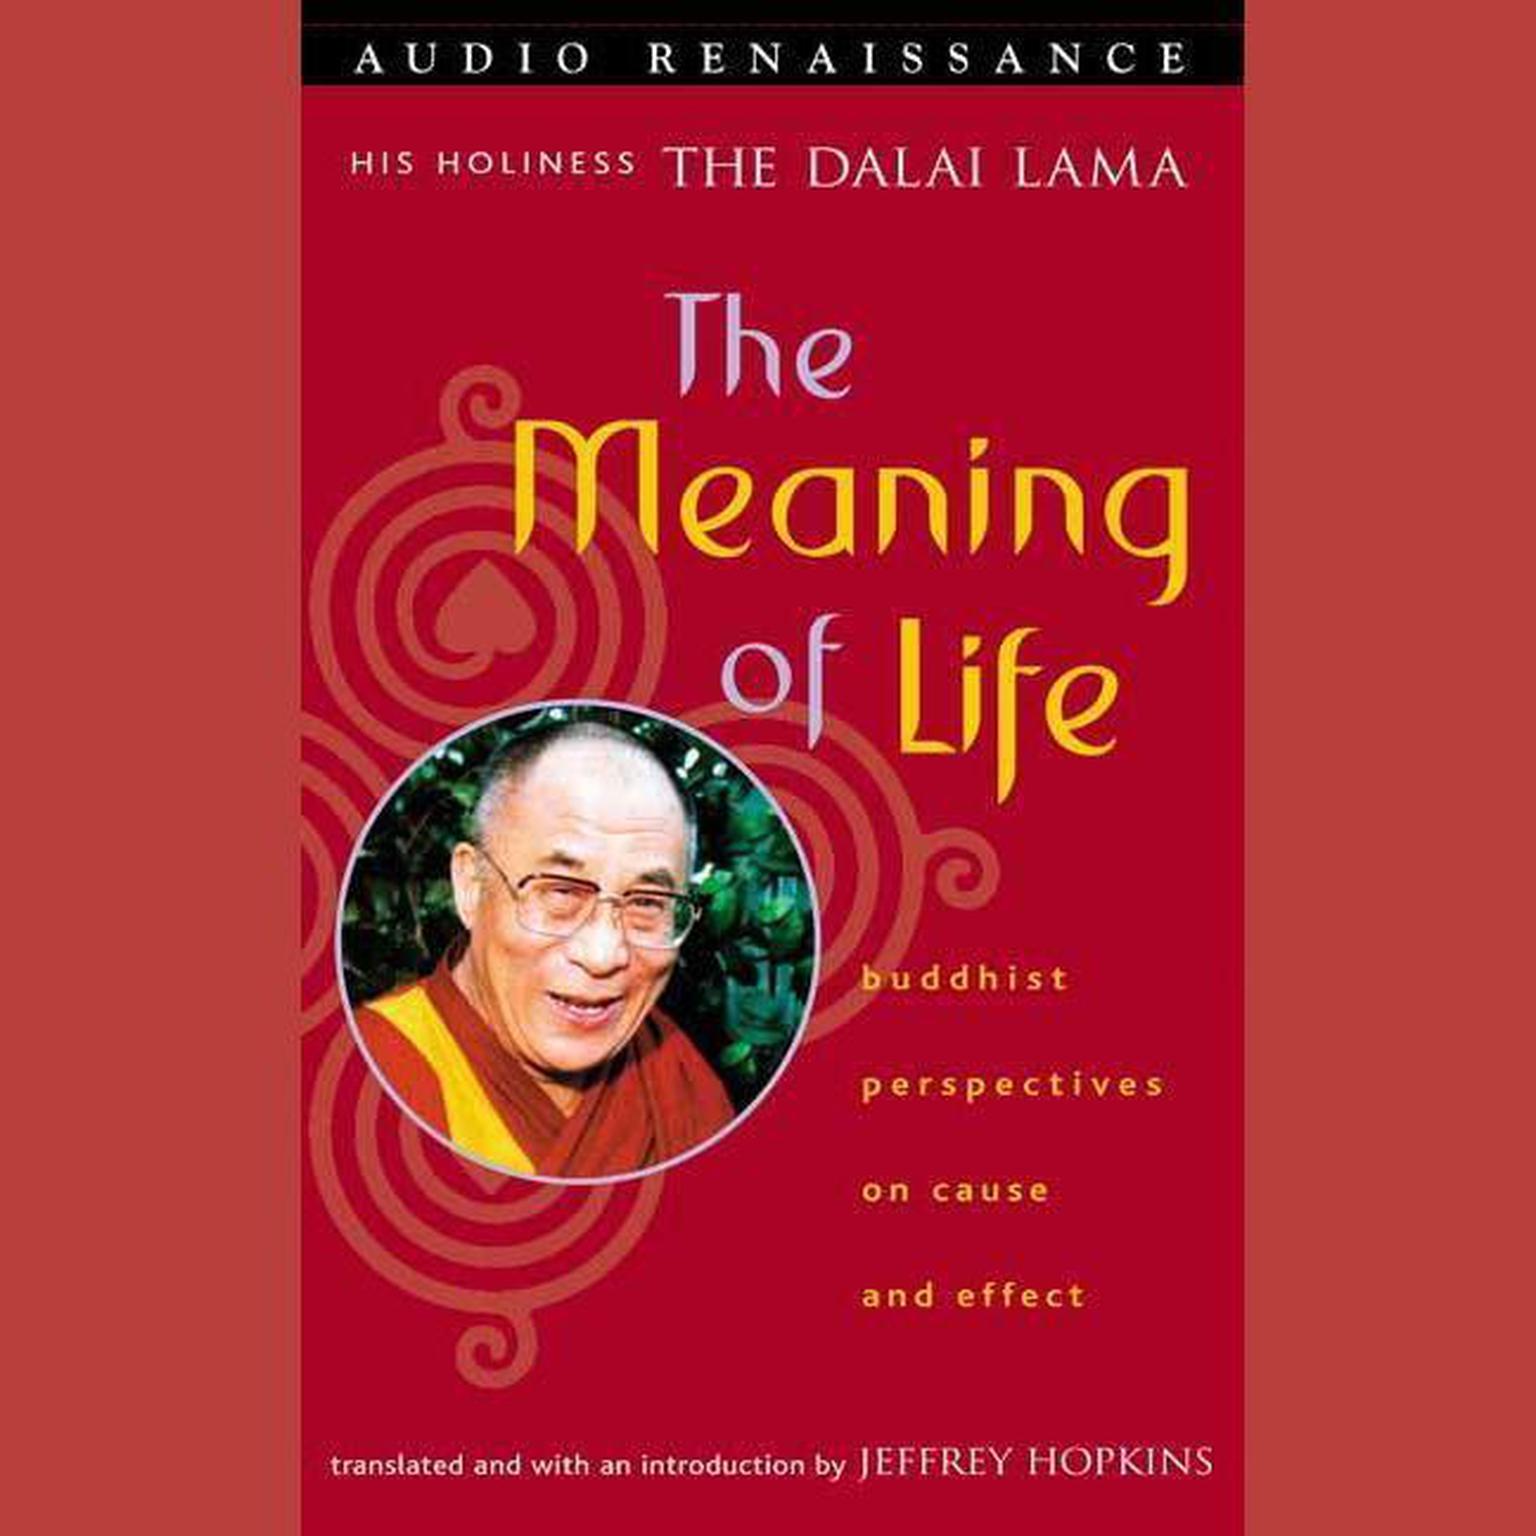 The Meaning of Life (Abridged): Buddhist Perspectives on Cause and Effect Audiobook, by His Holiness the Dalai Lama